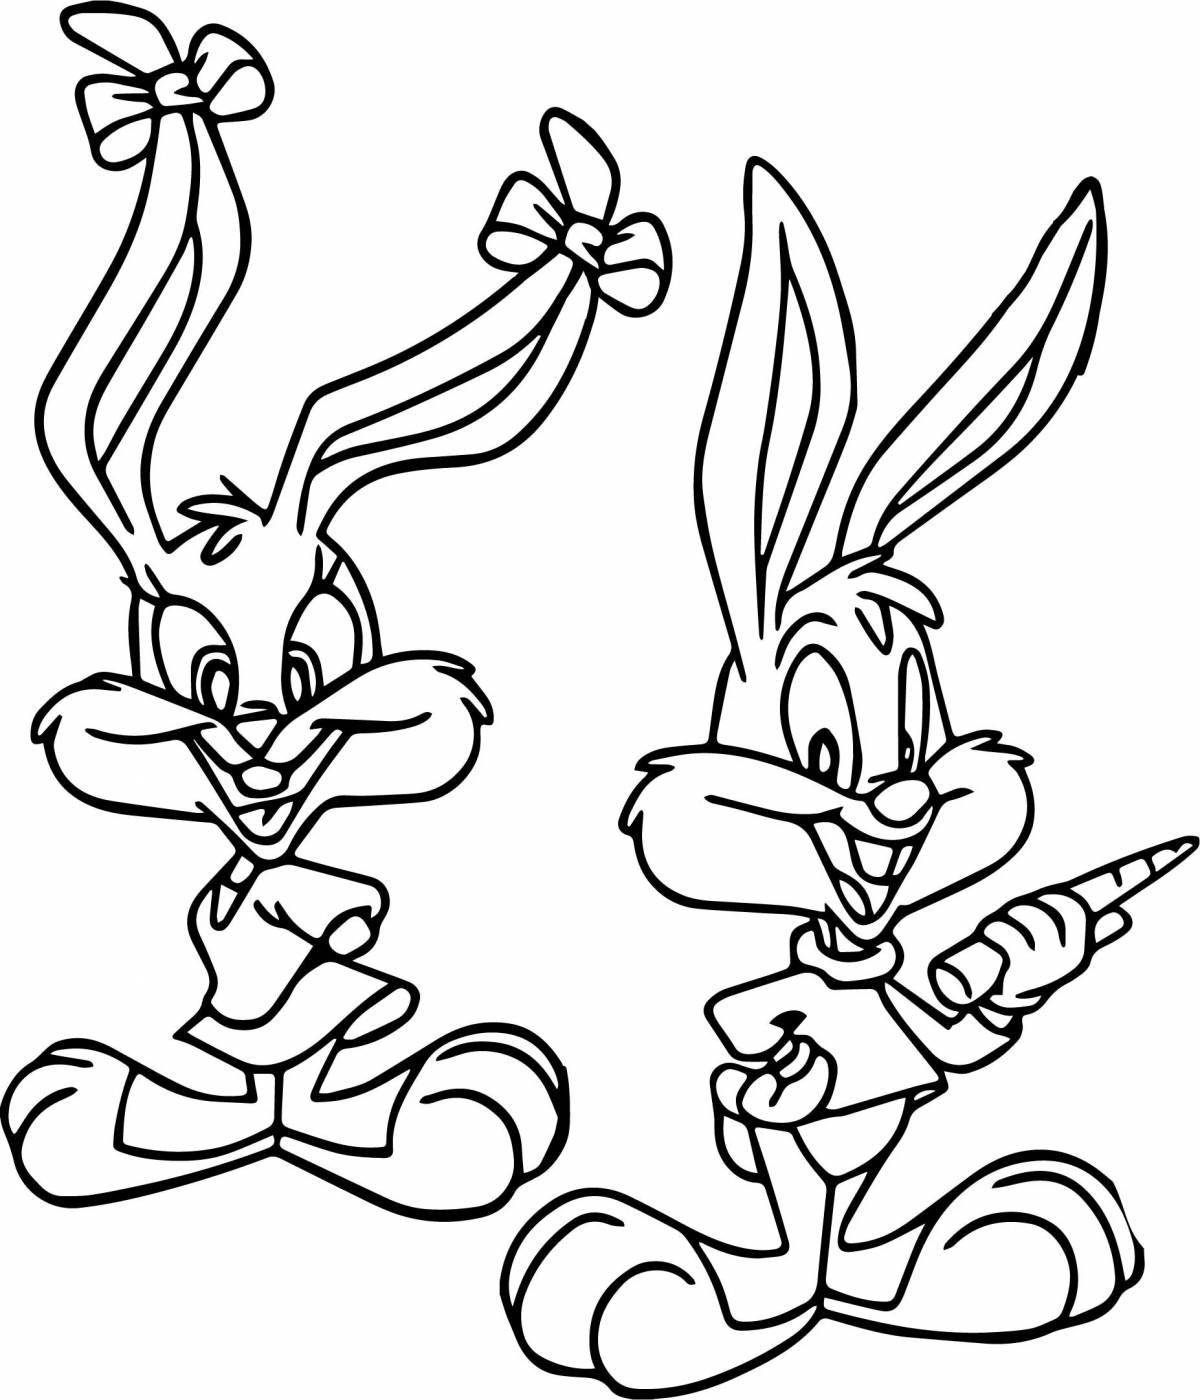 Lola bunny's vibrant coloring page